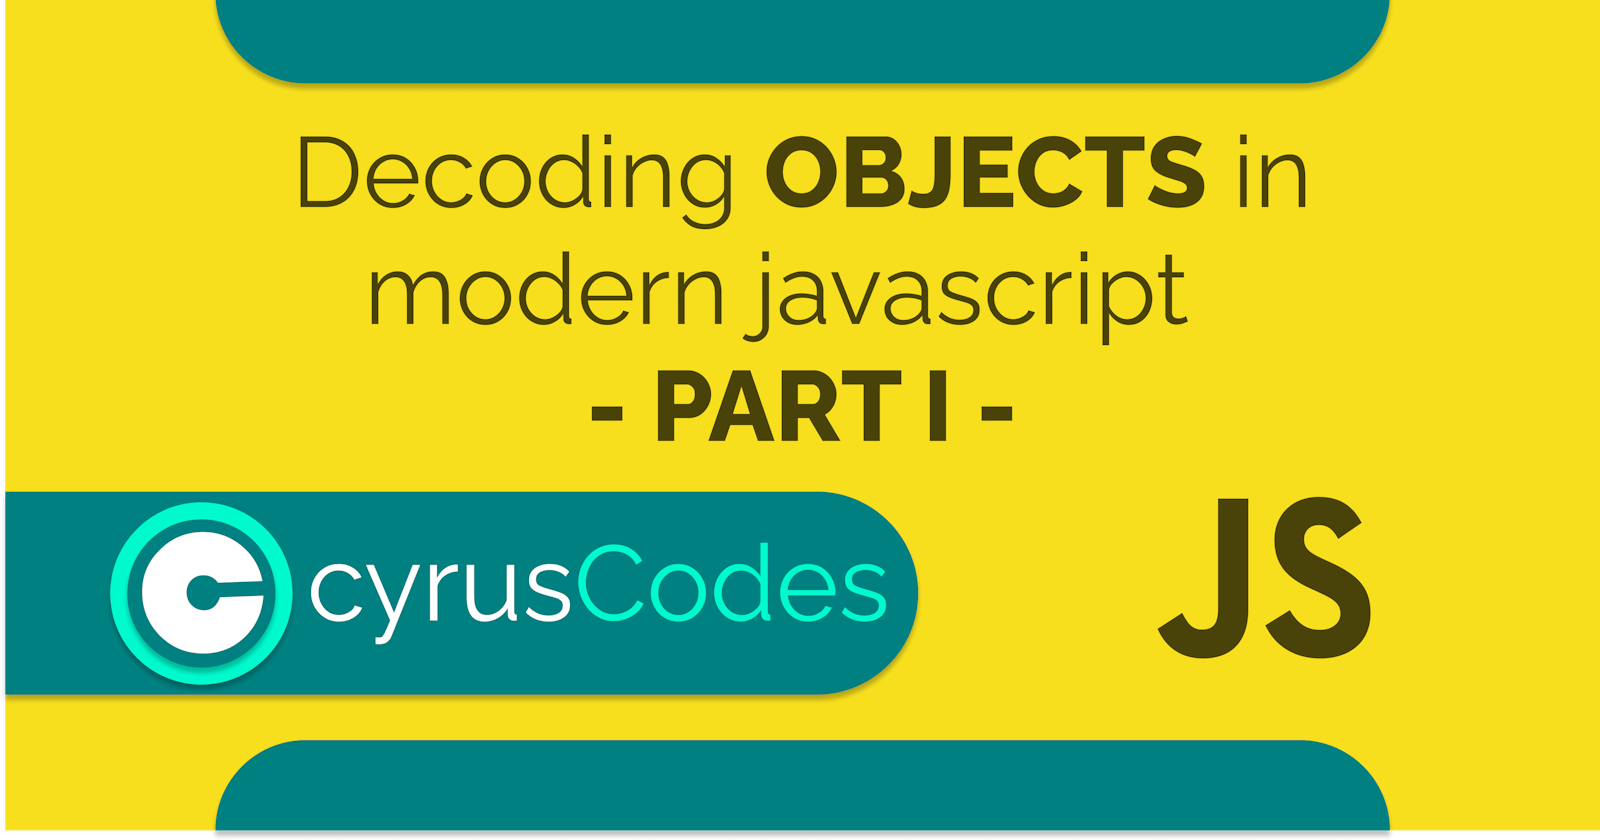 Decoding OBJECTS in modern javascript  - PART I;